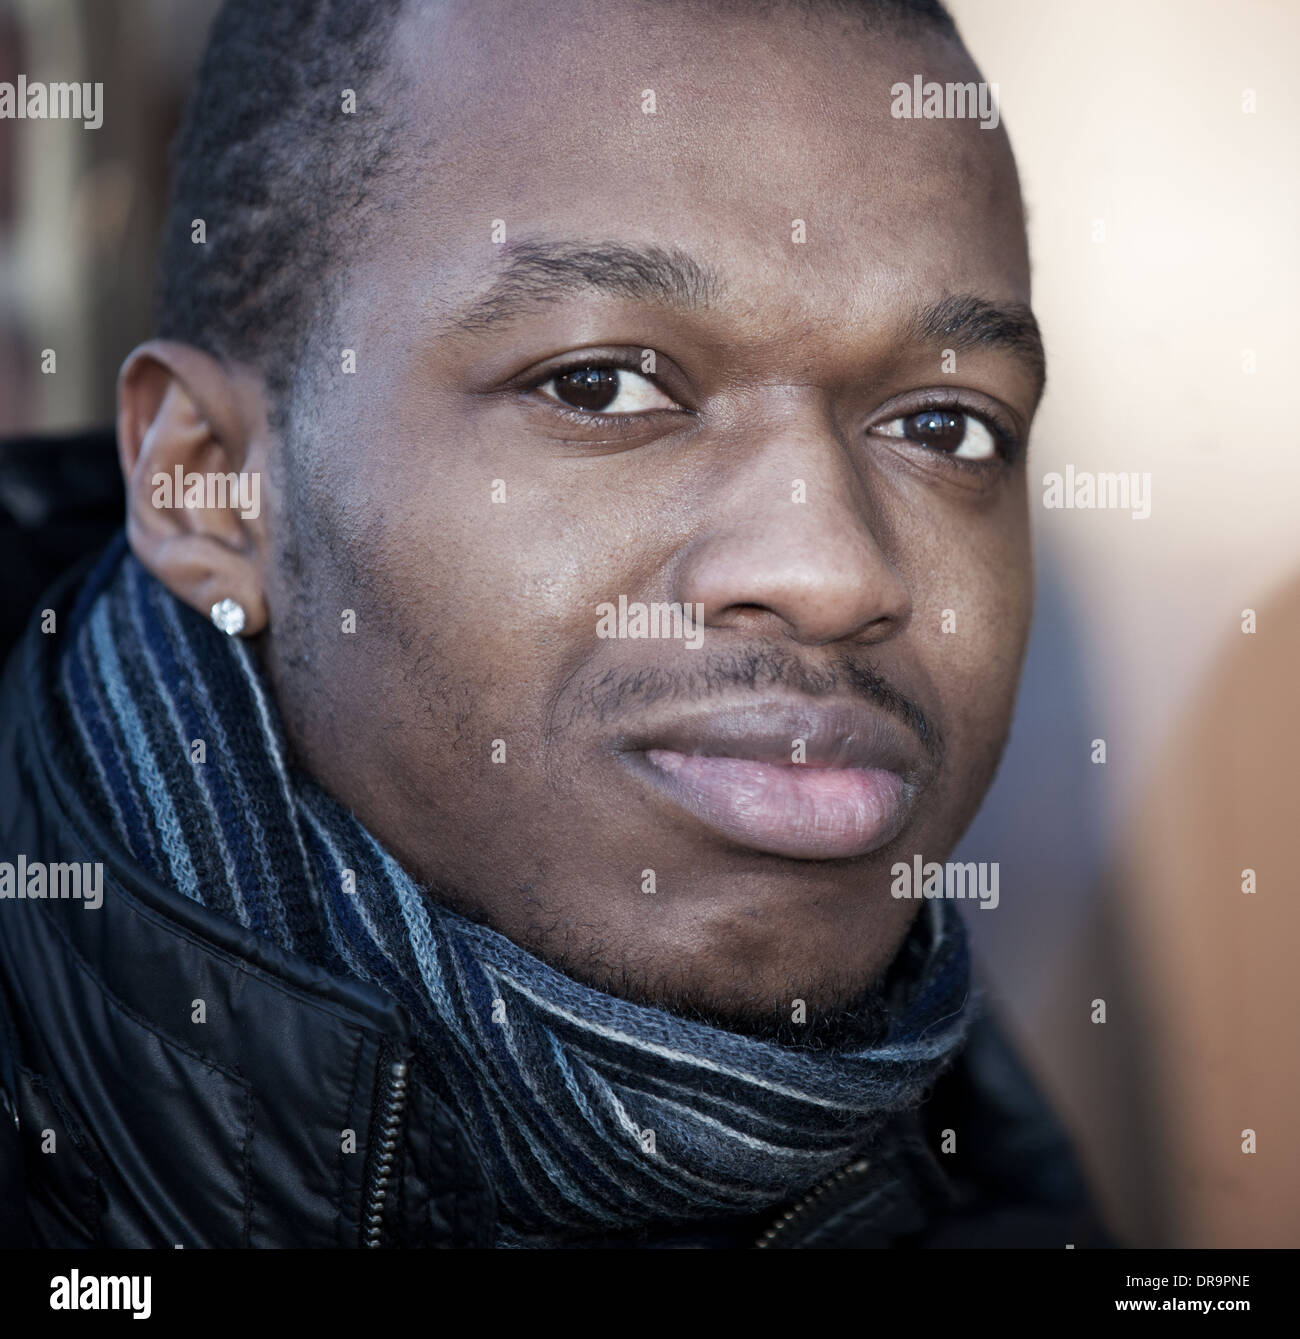 Black guy in winter clothes Stock Photo